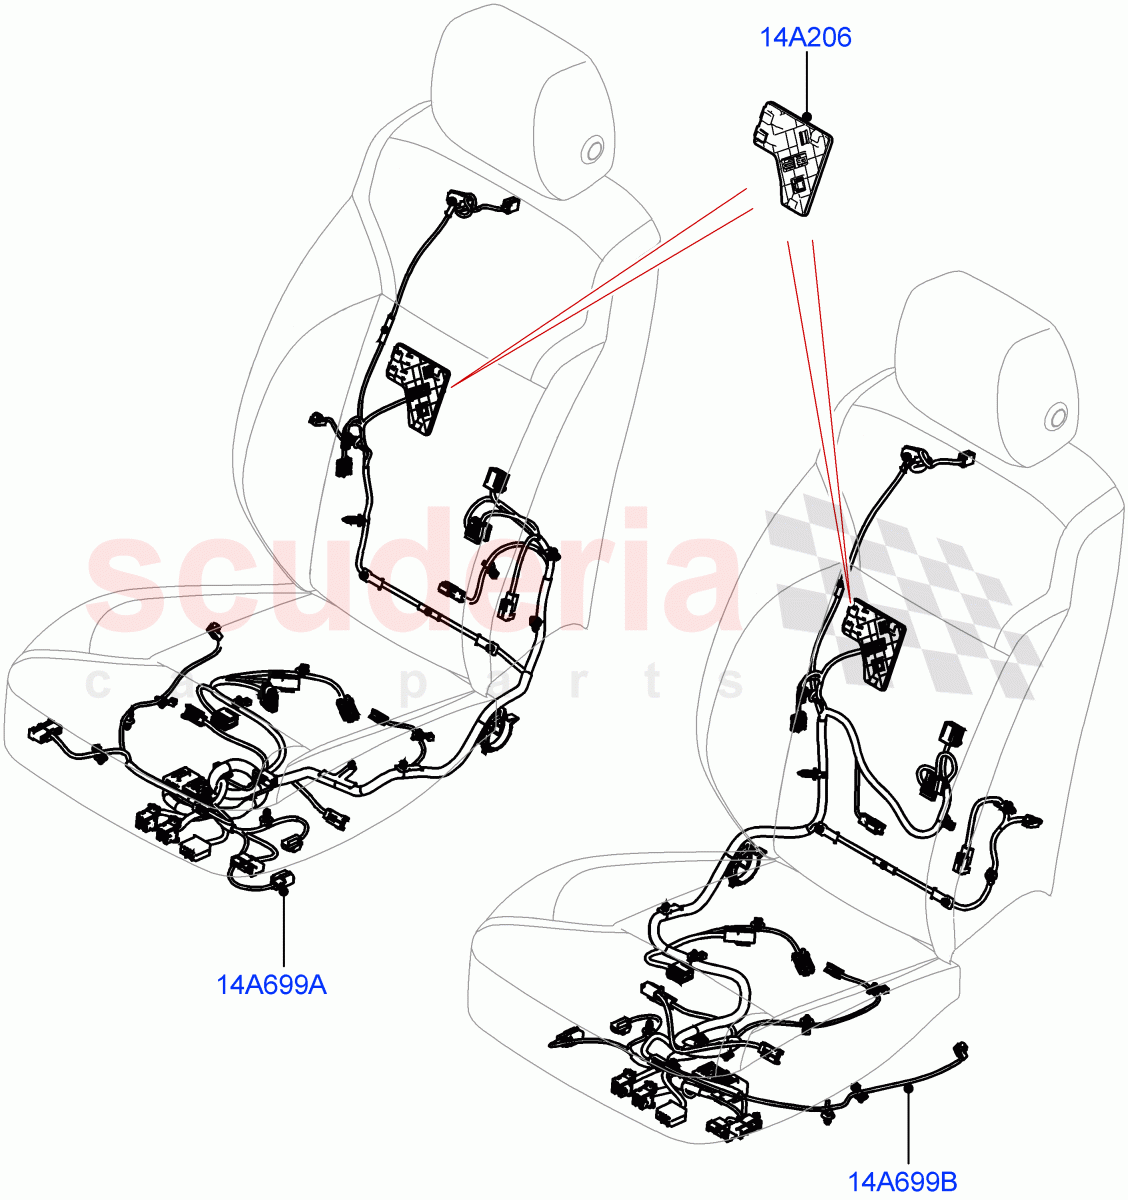 Wiring - Seats(Front Seats)((V)FROMMA000001) of Land Rover Land Rover Range Rover Velar (2017+) [5.0 OHC SGDI SC V8 Petrol]